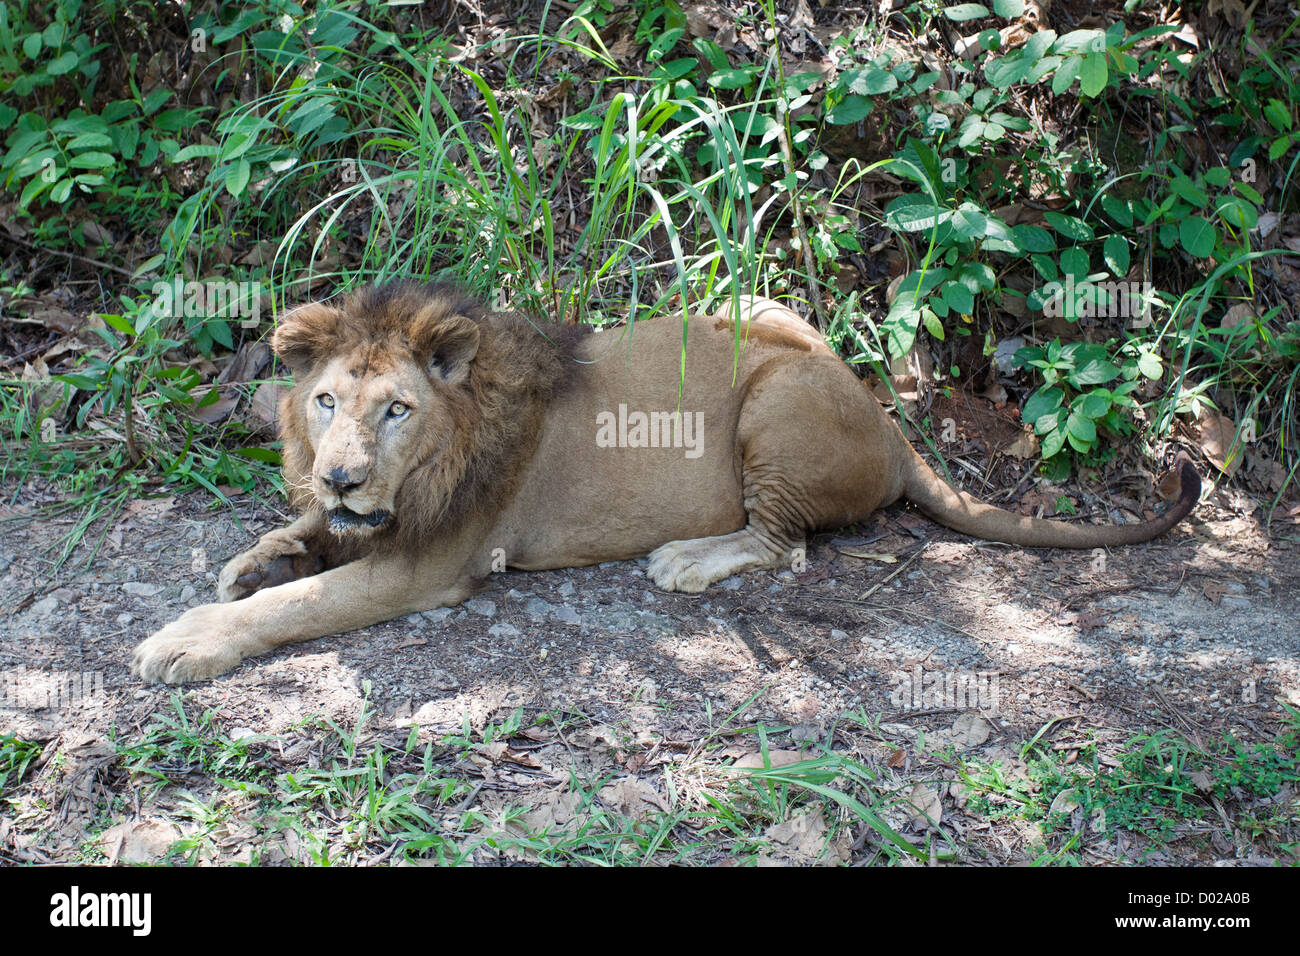 Lion In India Stock Photo